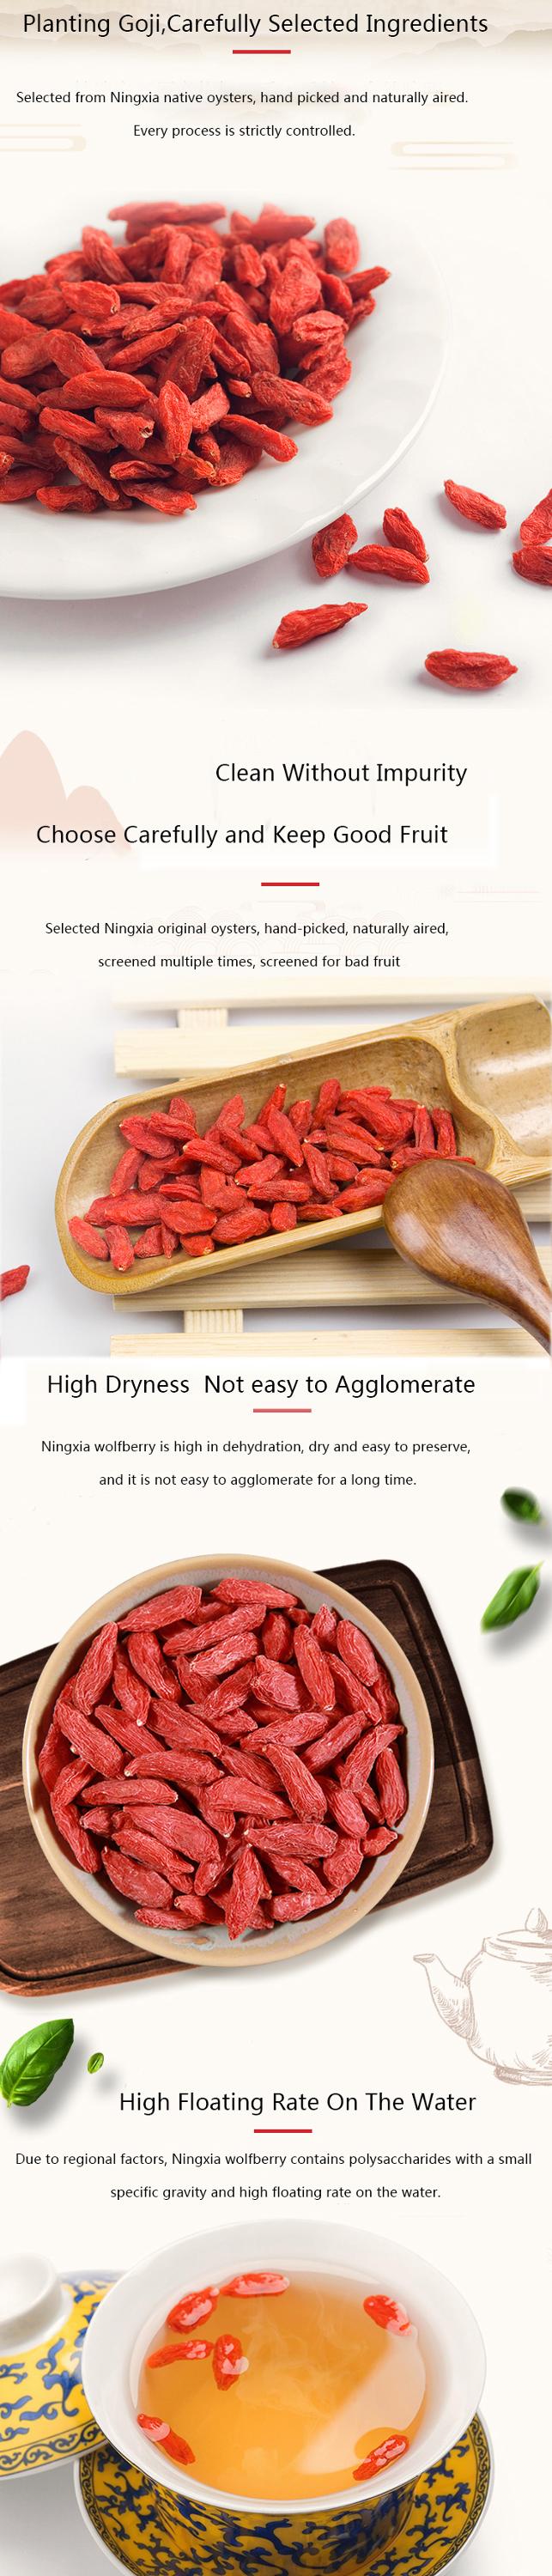 Wholesale Chinese Ningxia Dried Dehydrated Red Sweet Goji Berry,Bulk Dehydrated/Dry/Dried Fruits Dried Goji berry